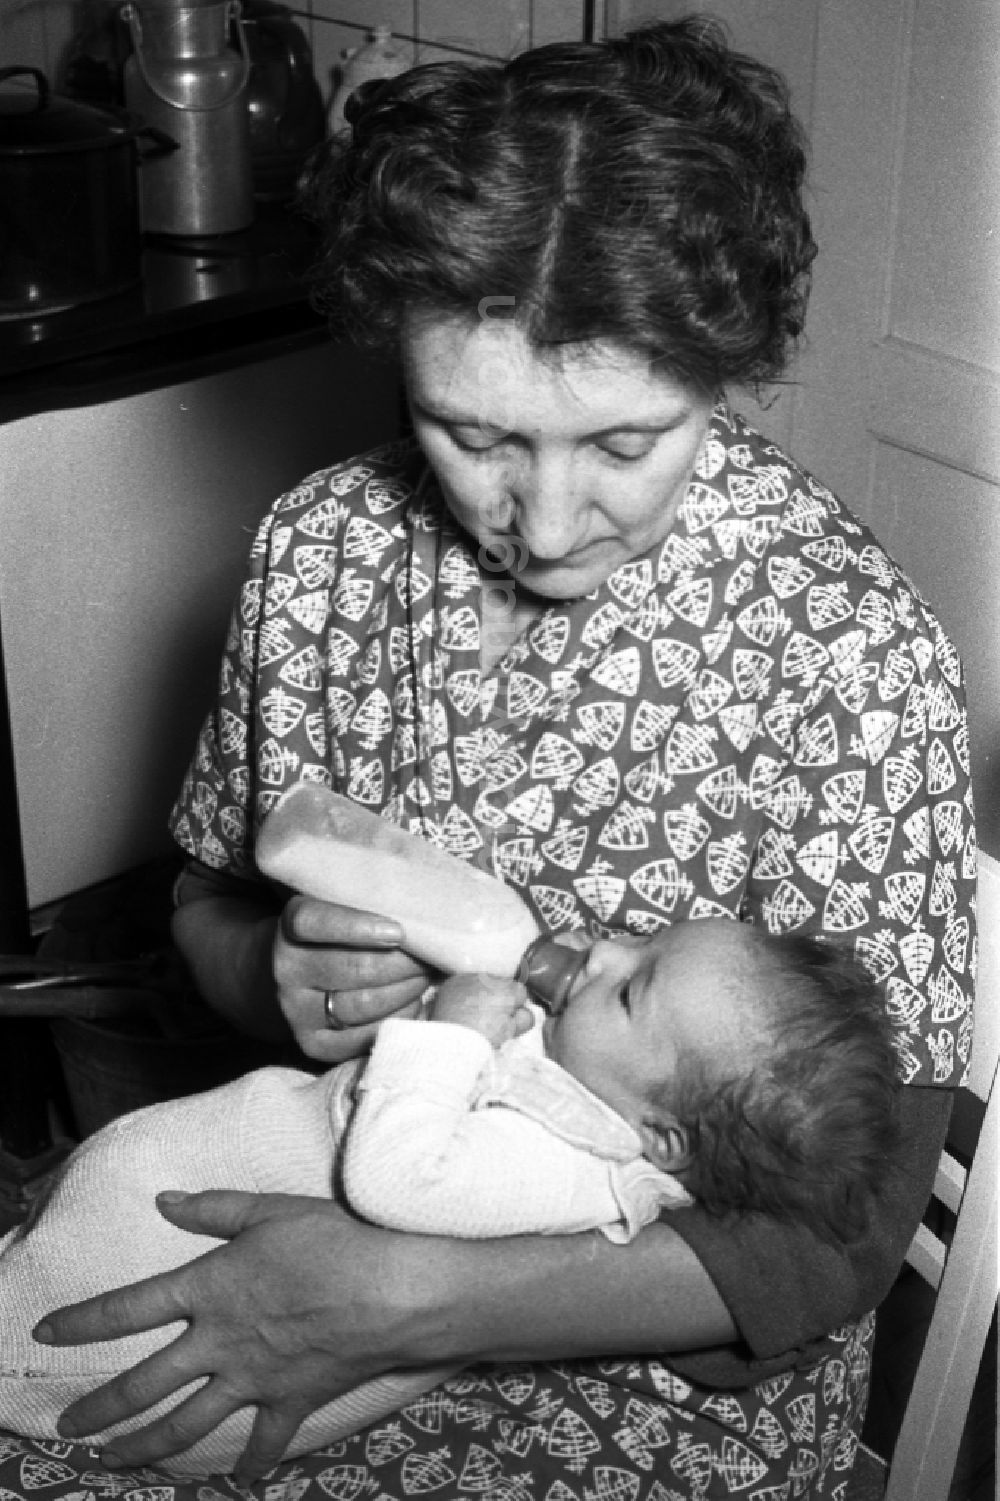 GDR picture archive: Merseburg - A mother gives to her baby the teat bottle in Merseburg in the federal state Saxony-Anhalt in the area of the former GDR, German democratic republic